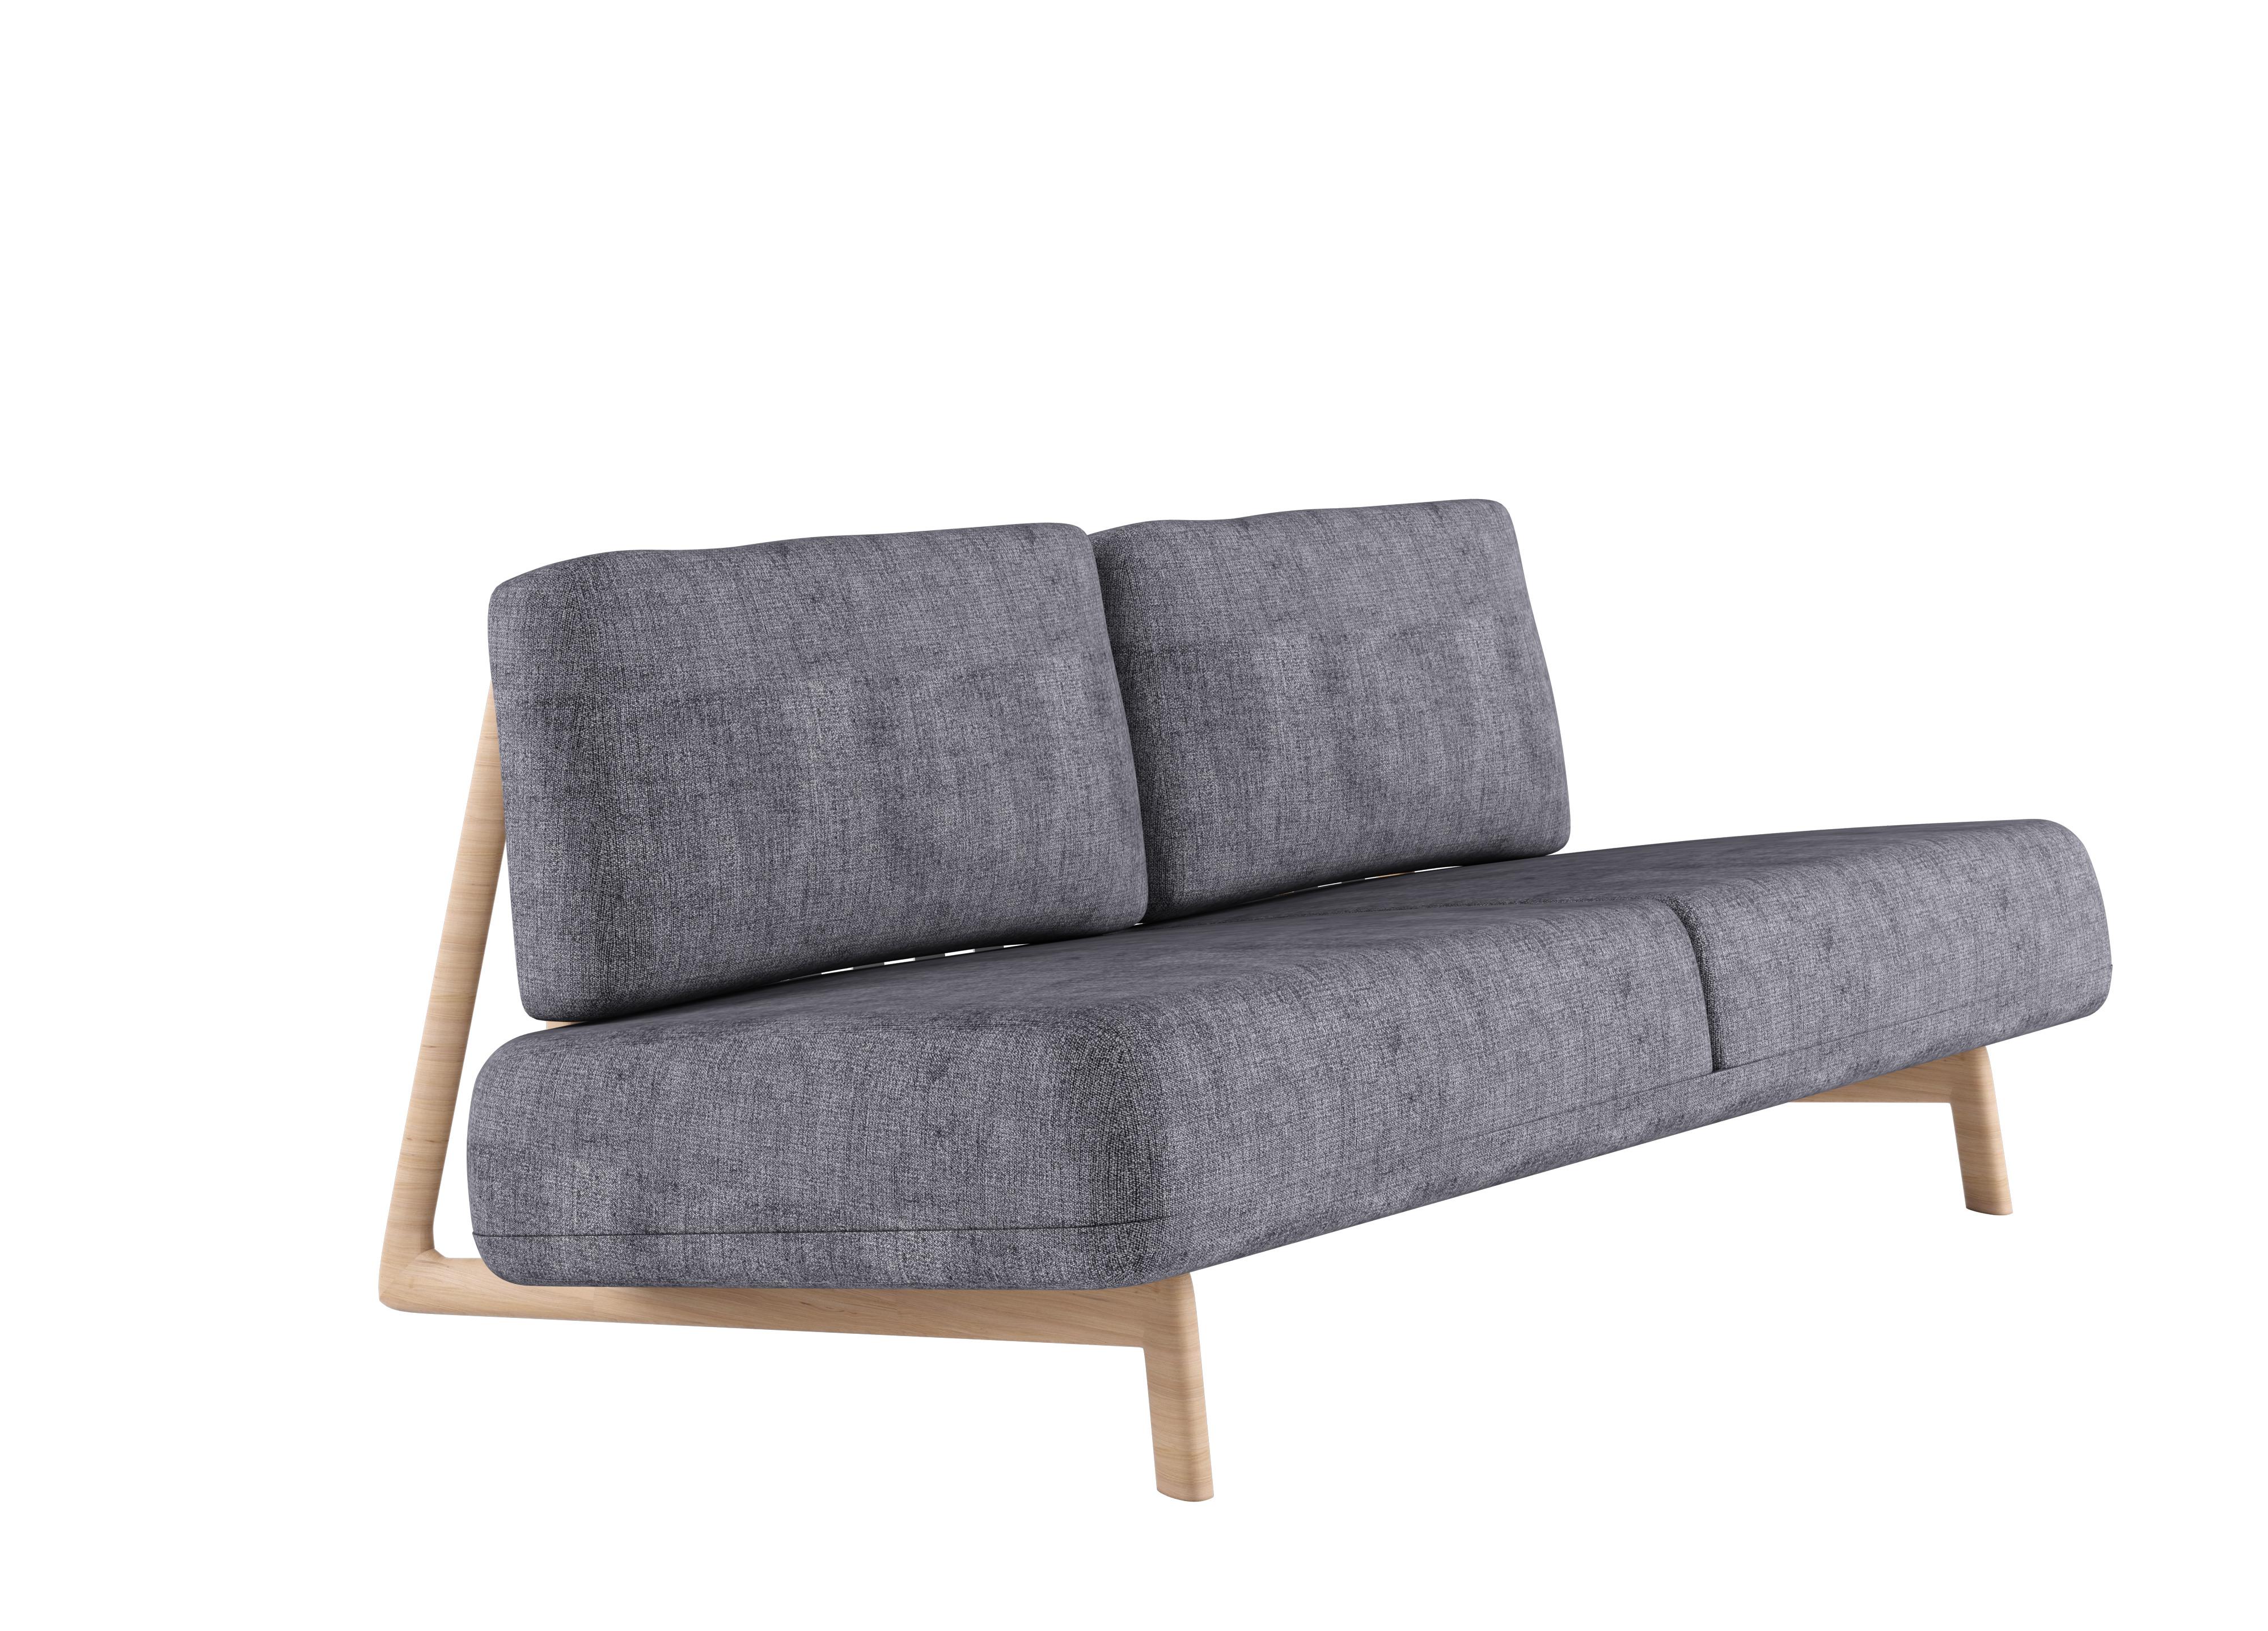 Alias D20 Trigono Two Seater Sofa in Grey Upholstery with Natural Oak Frame by Michele De Lucch

Two-seater sofa with structure in solid oak and belts in fabric or leather.Seat and back combined with removable cover in fabric or leather.NOTES: the